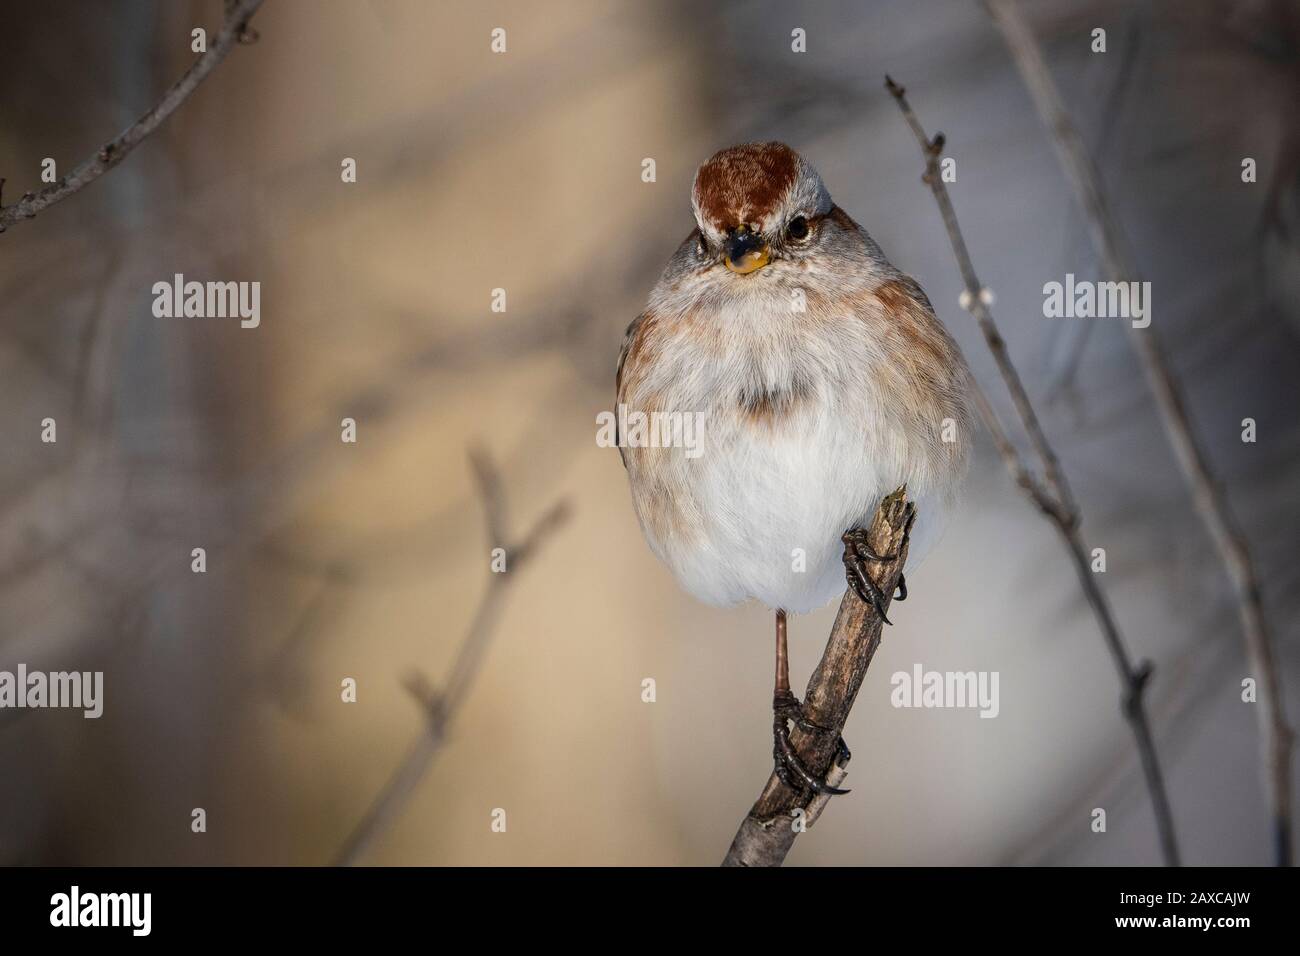 American Tree Sparrow perched in a tree near a bird feeder during winter. Stock Photo